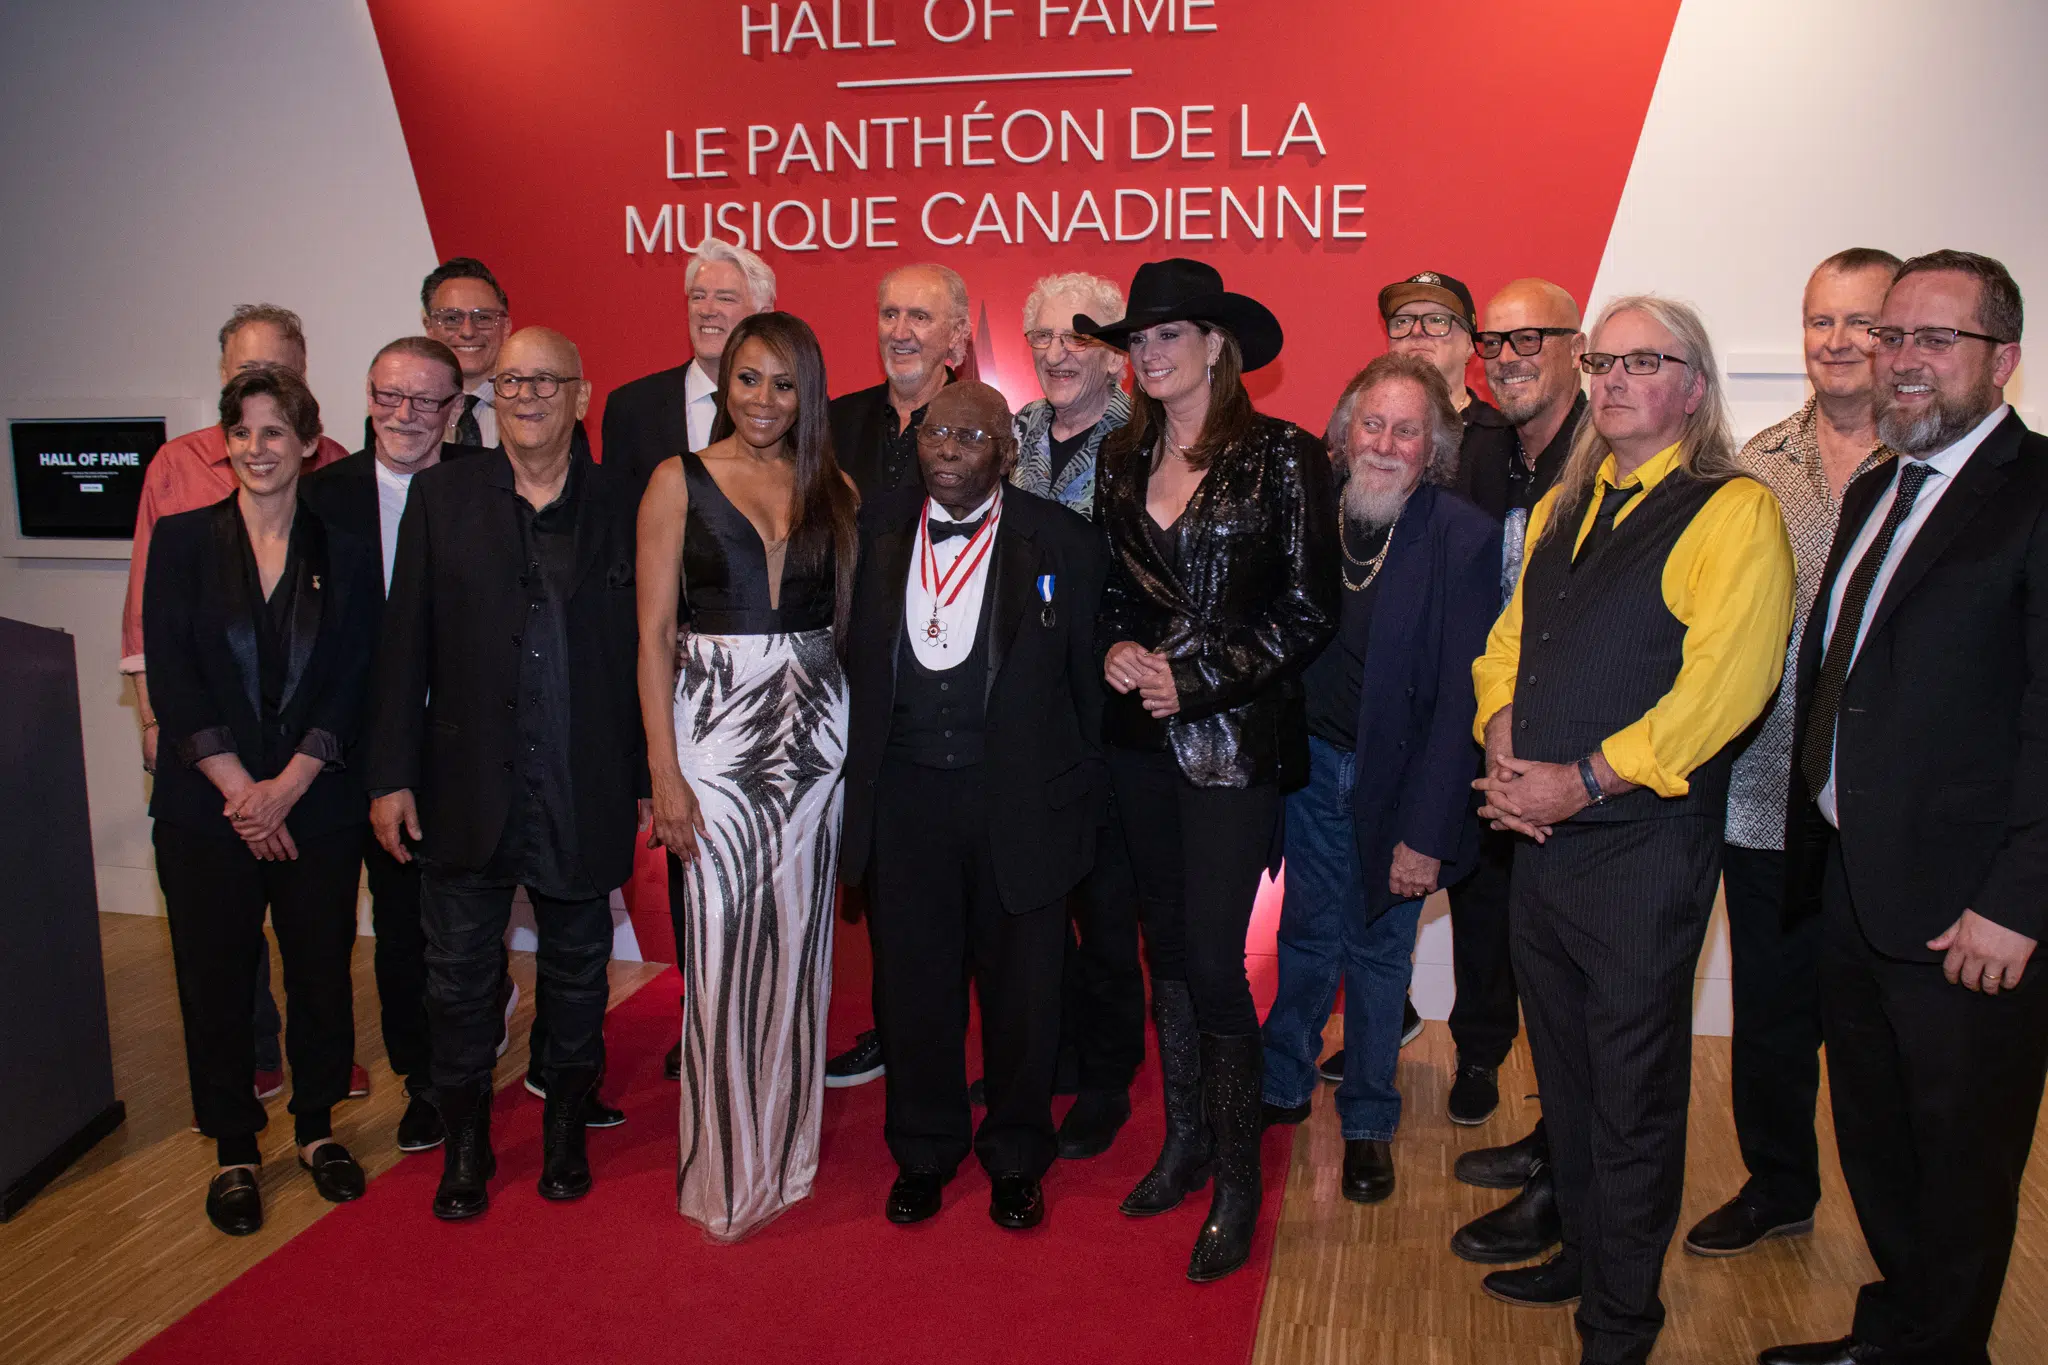 Immortalizing pillars of Canadian music at the 2023 Canadian Hall of